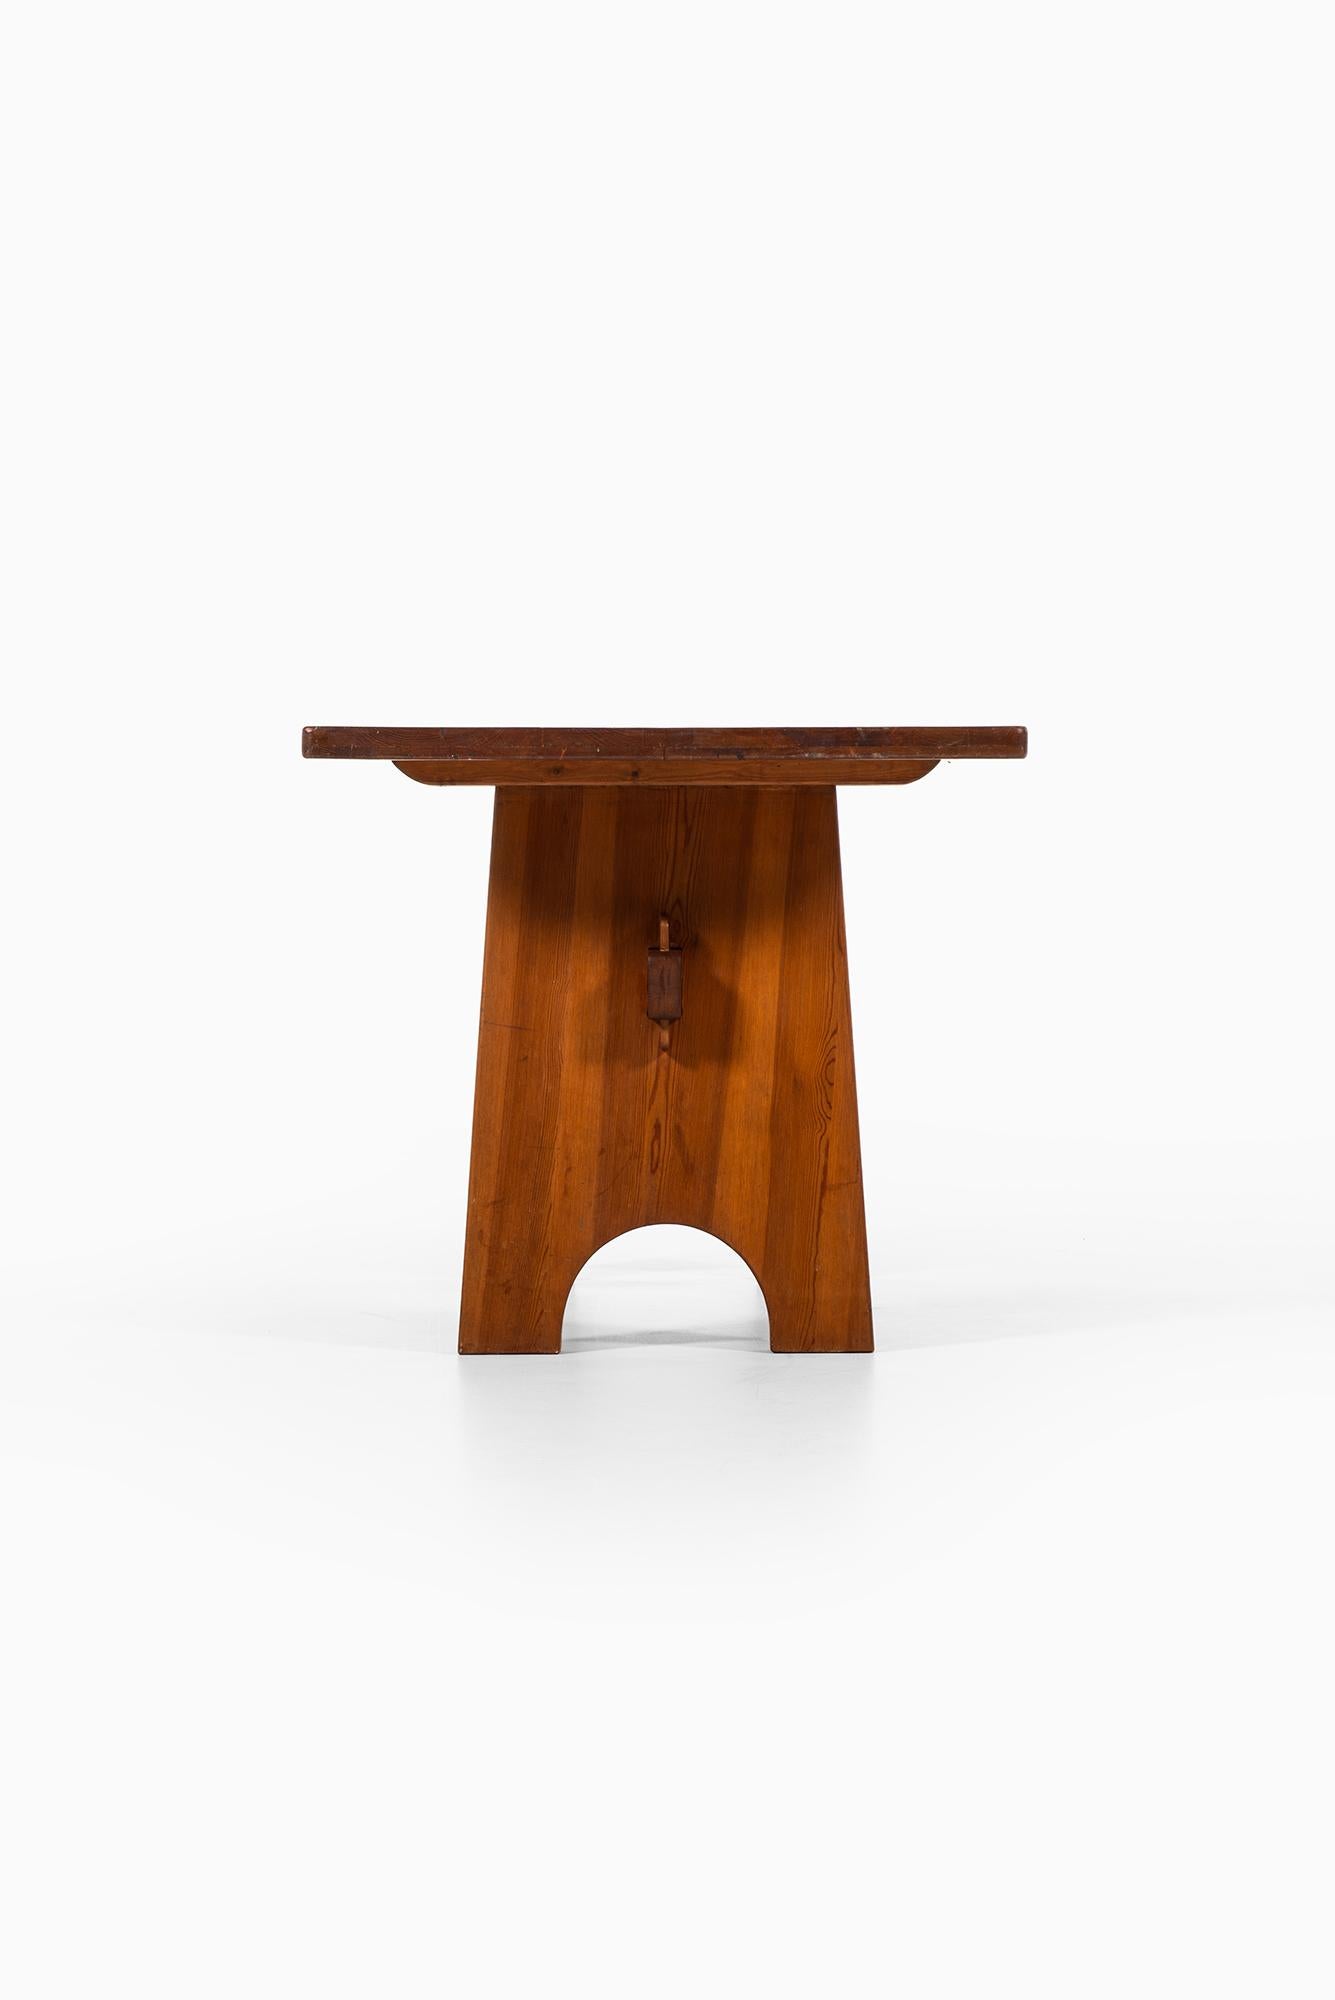 Mid-20th Century Axel Einar Hjorth Attributed Dining Table in Pine Produced in Sweden